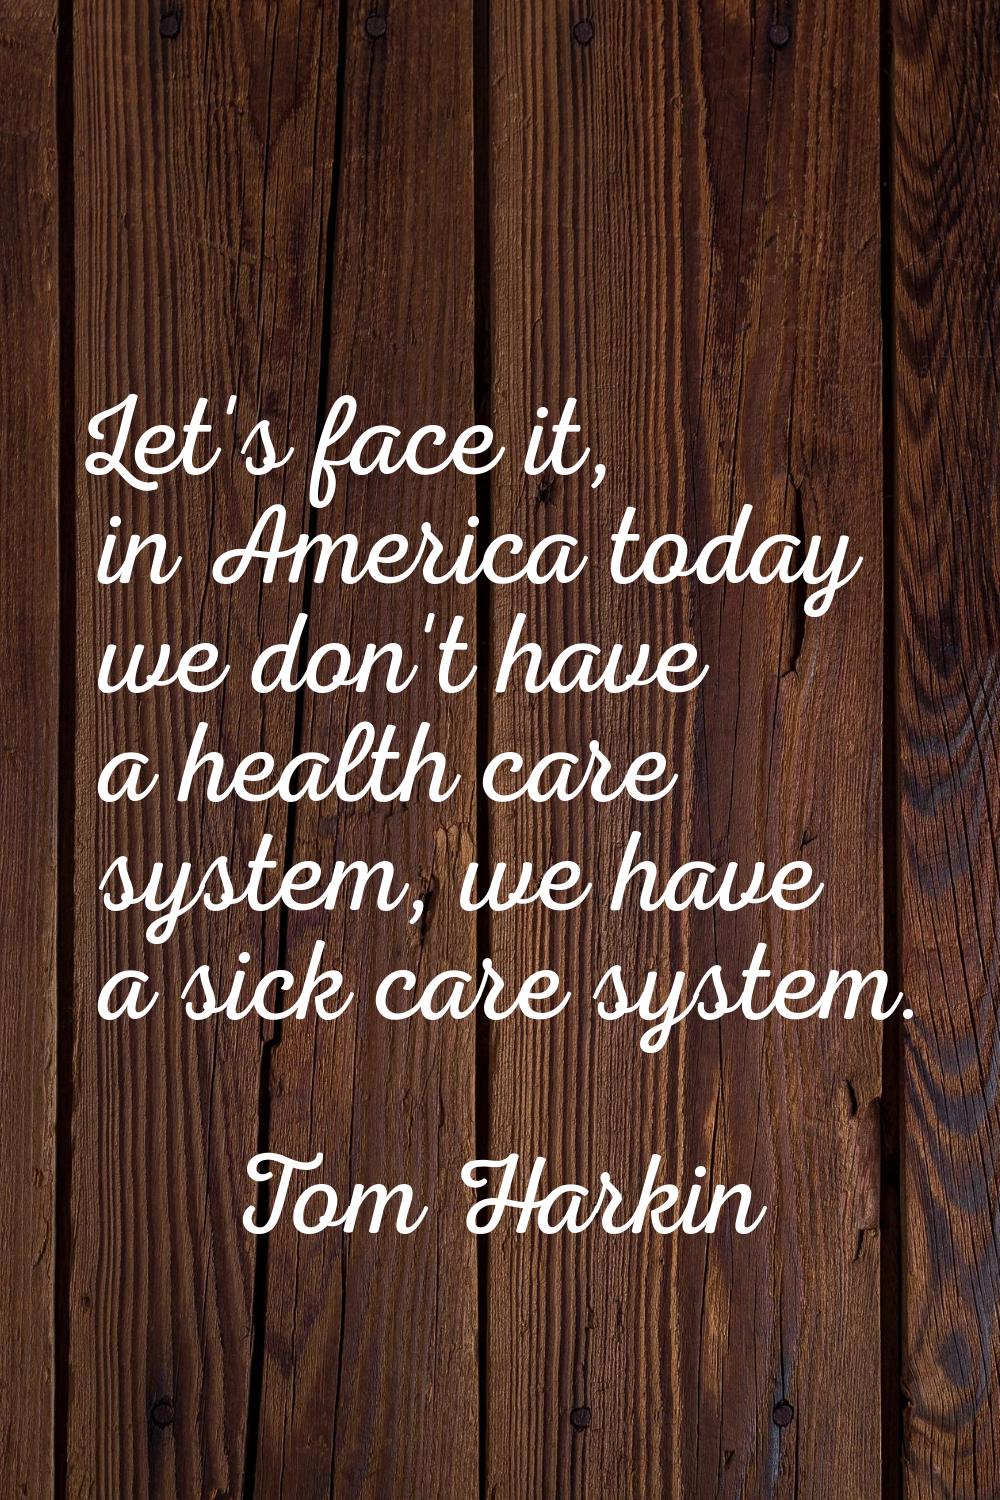 Let's face it, in America today we don't have a health care system, we have a sick care system.